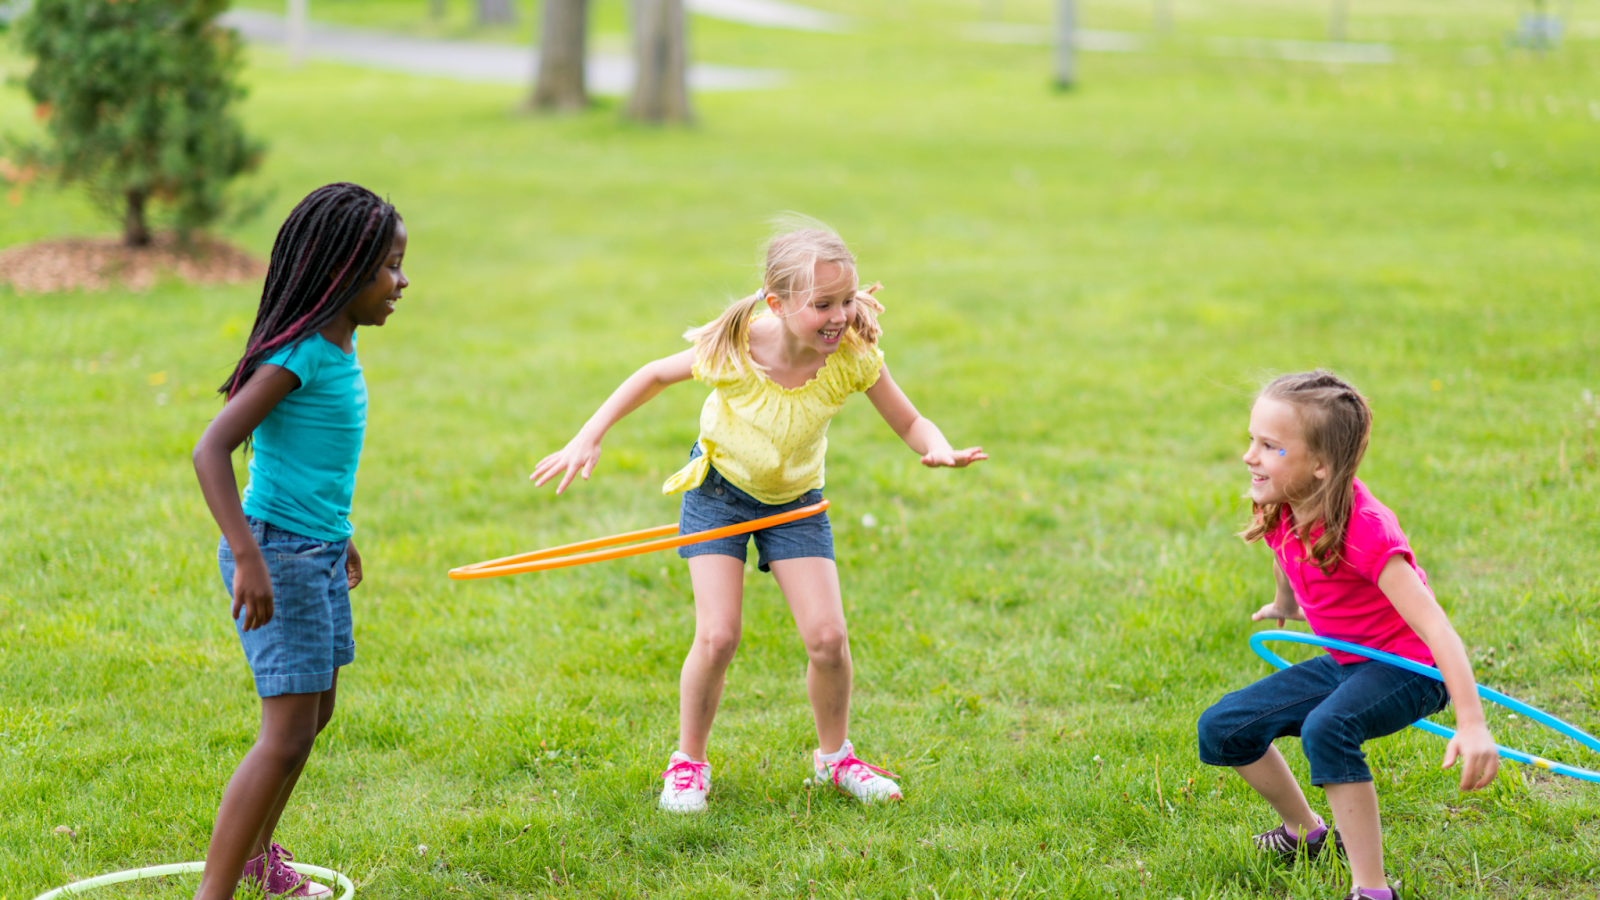 kids hula hooping in a grassy area outside